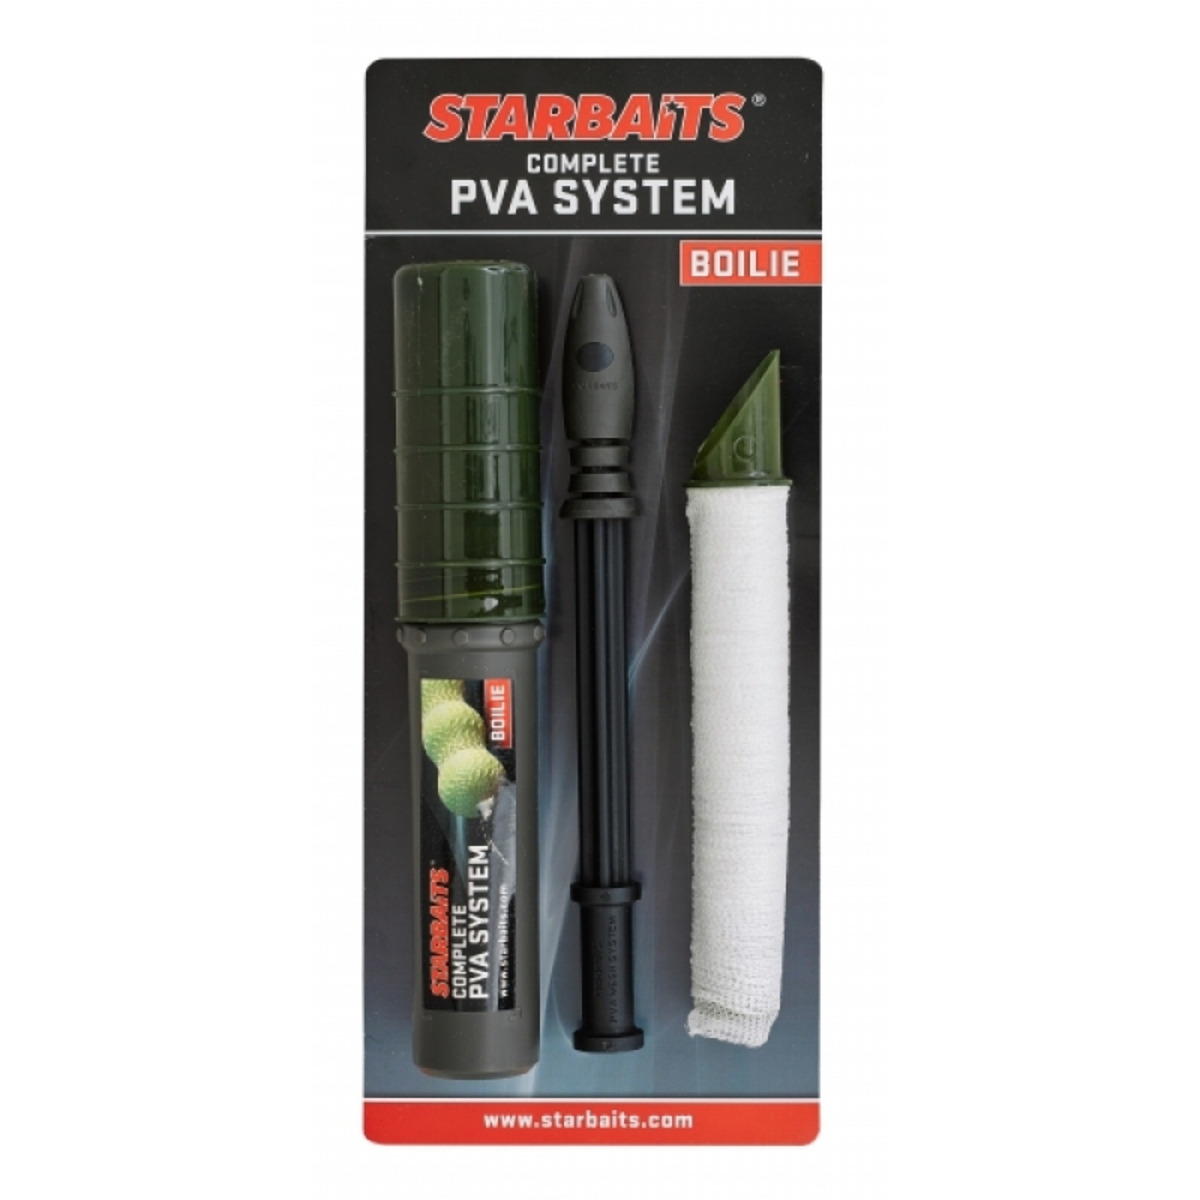 Starbaits Pva Boilie System - Complete